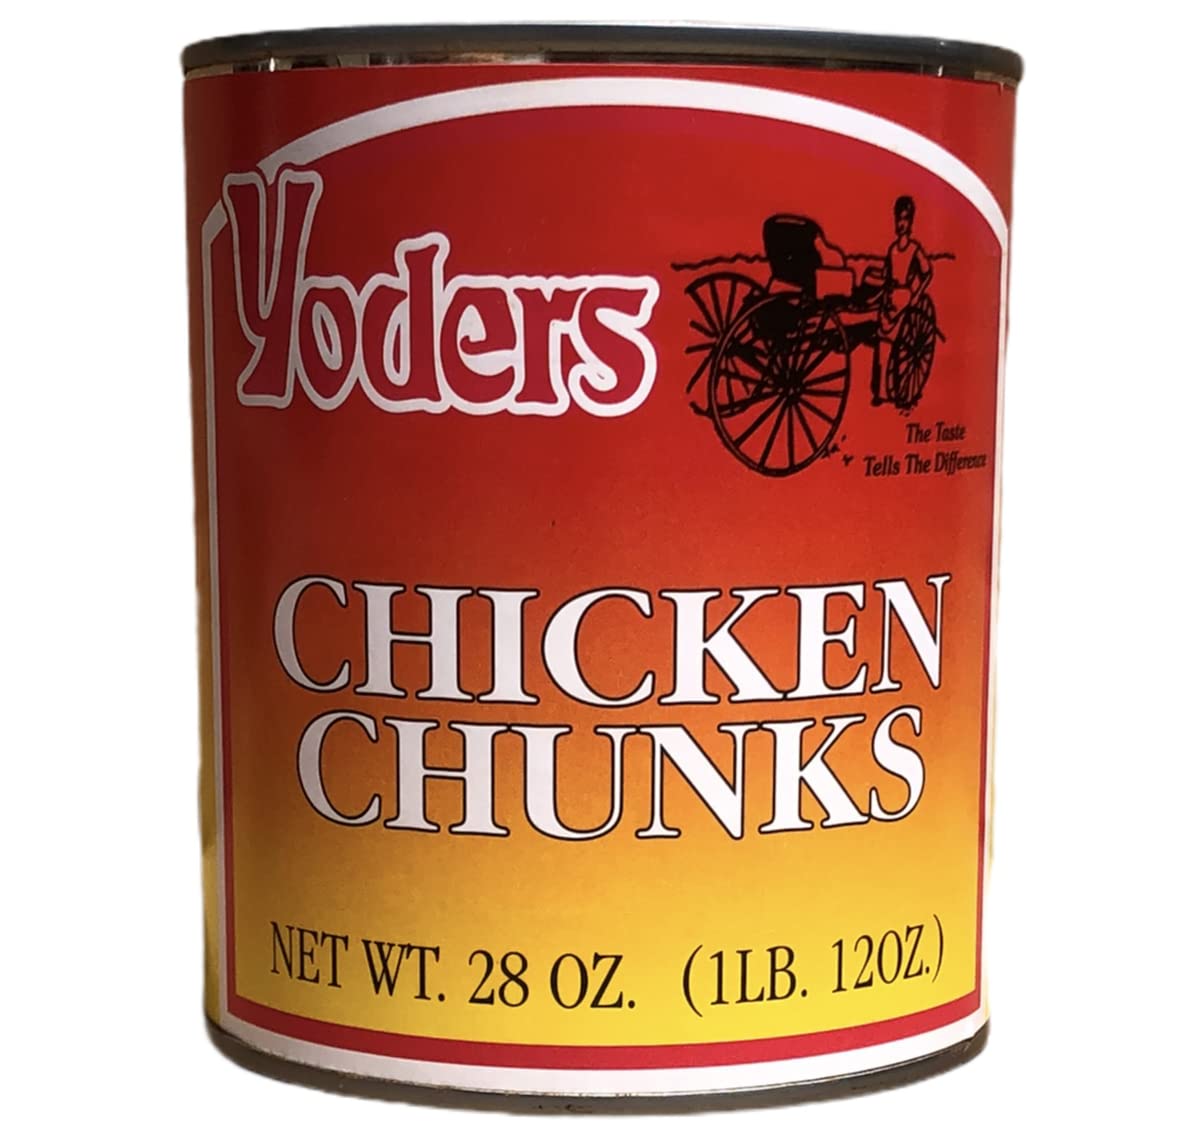 Yoder's  Canned Chicken Chunks Case (12 Cans) - Safecastle